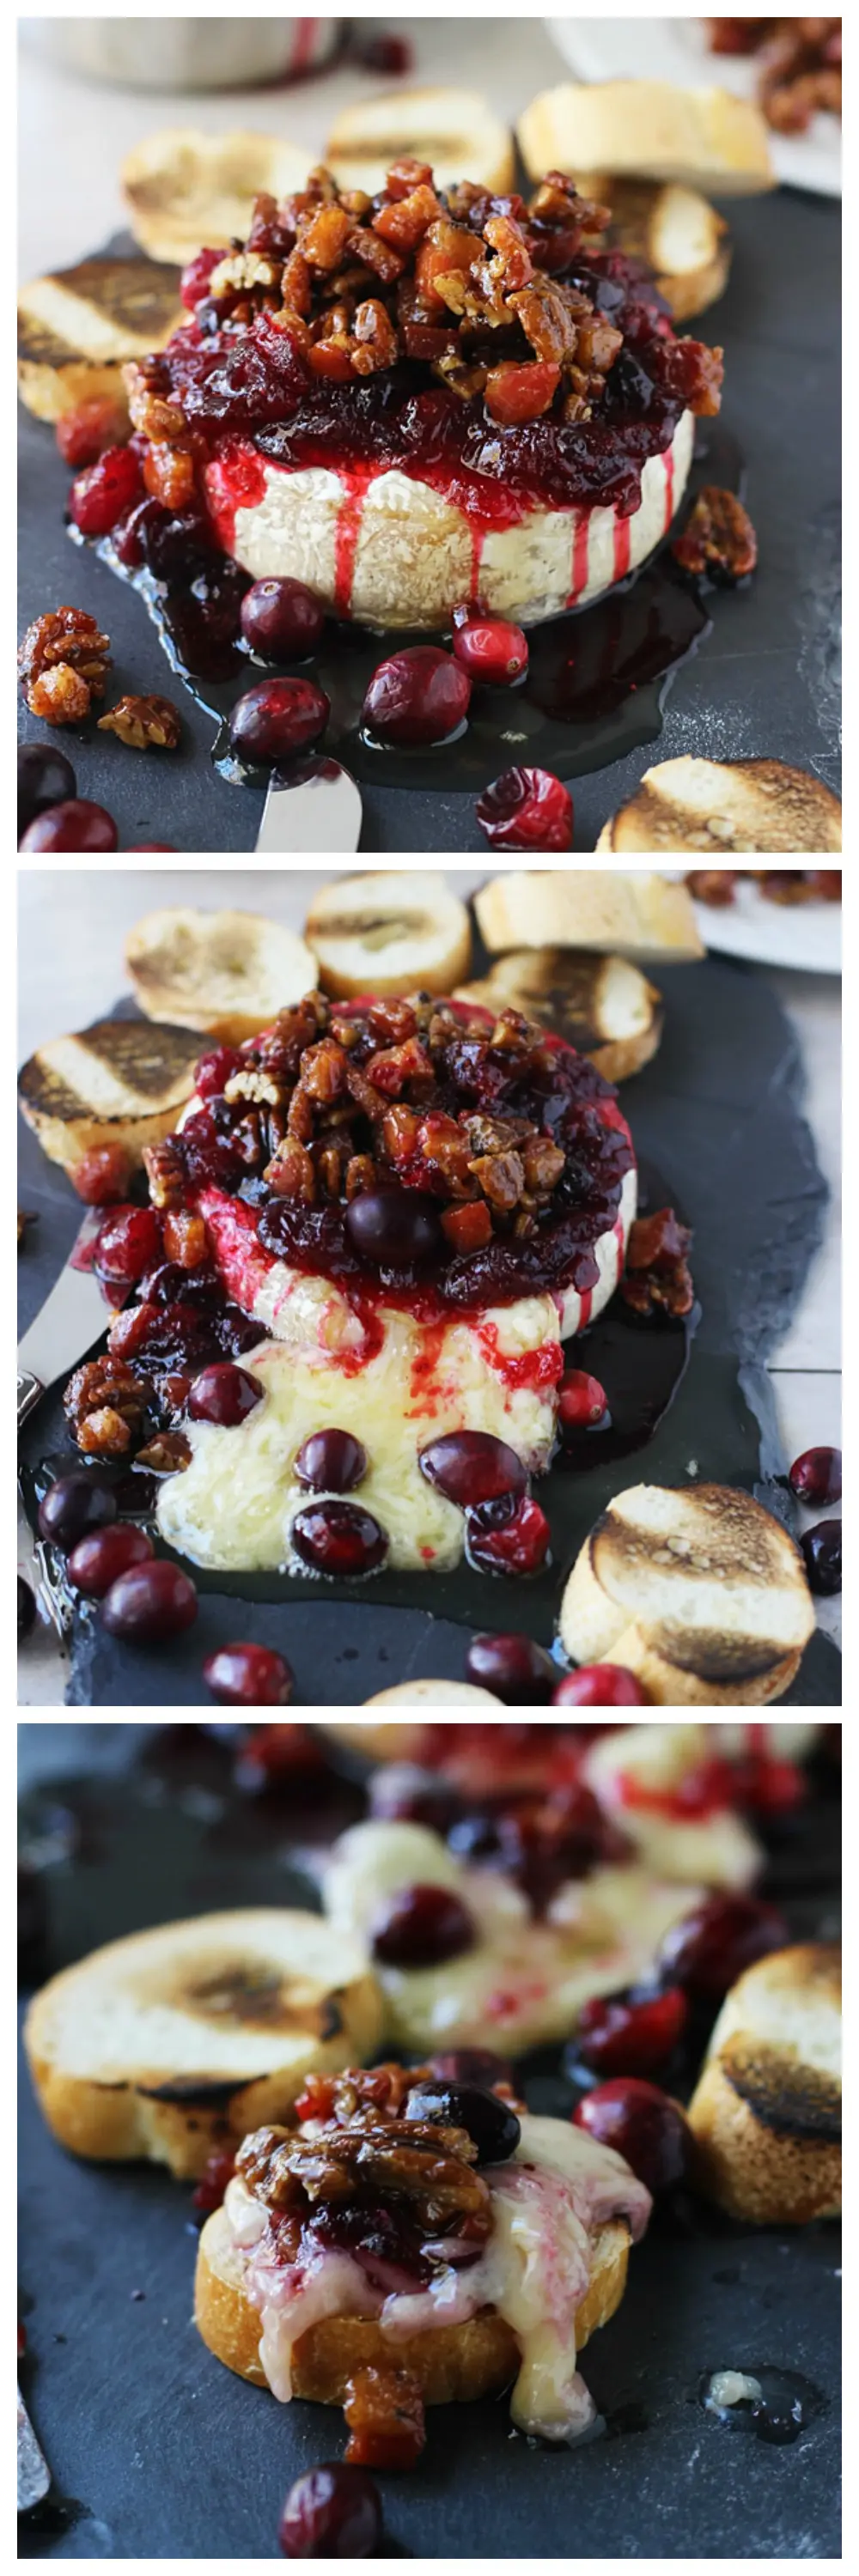 Baked Brie with Candied Pancetta, Pecans and Spicy Cranberries